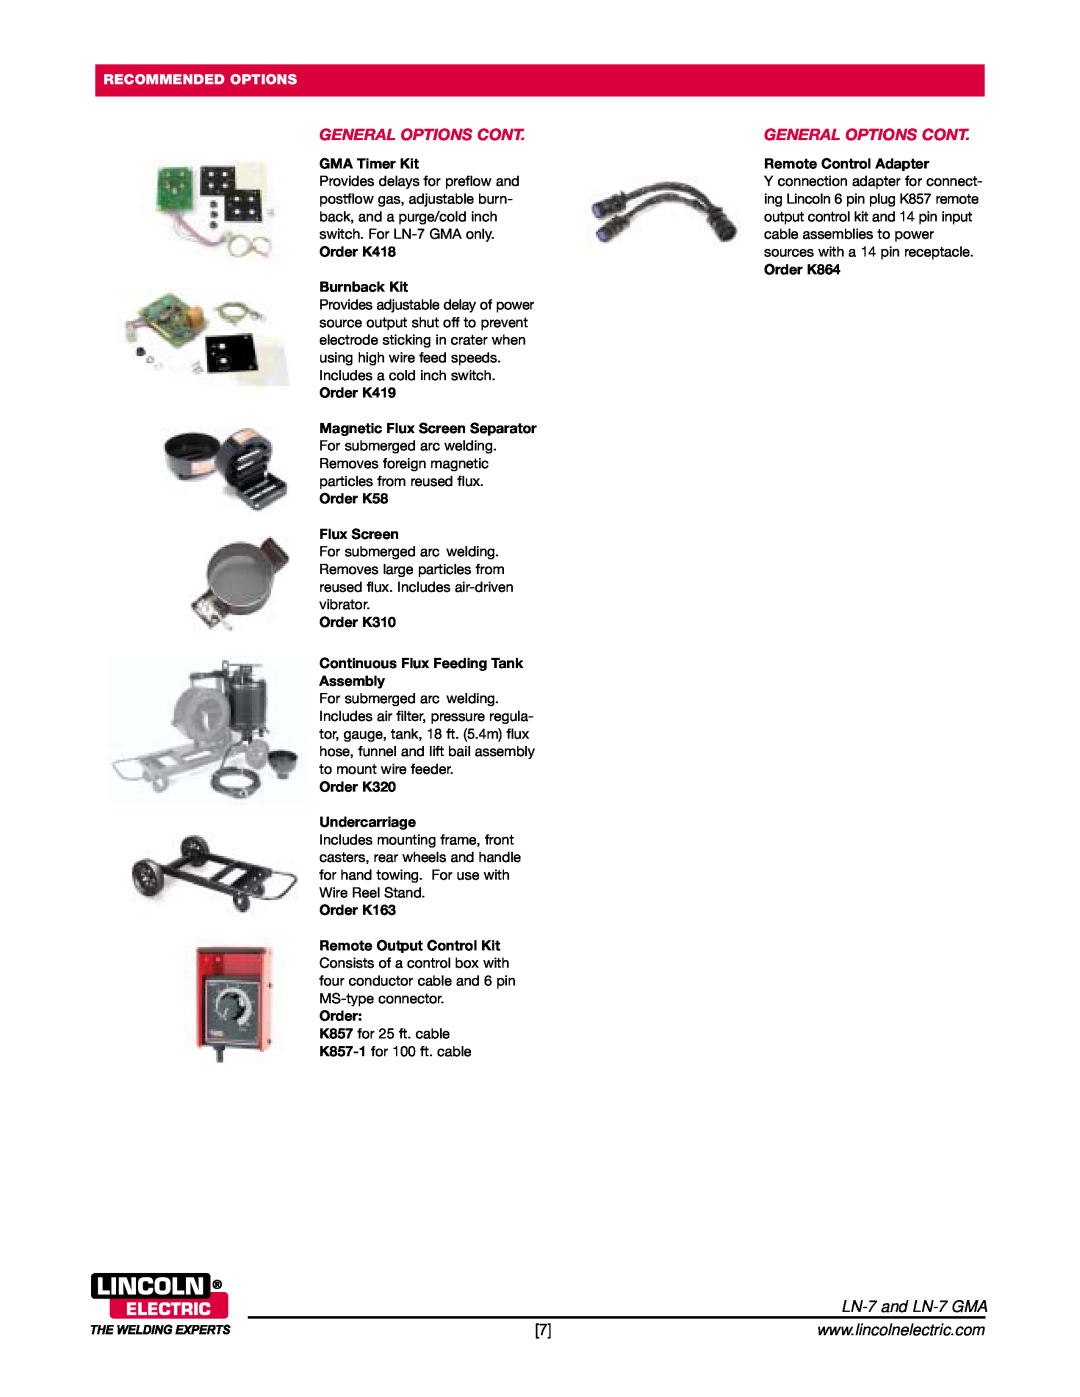 Lincoln Electric technical specifications General Options Cont, LN-7 and LN-7 GMA, Recommended Options, GMA Timer Kit 